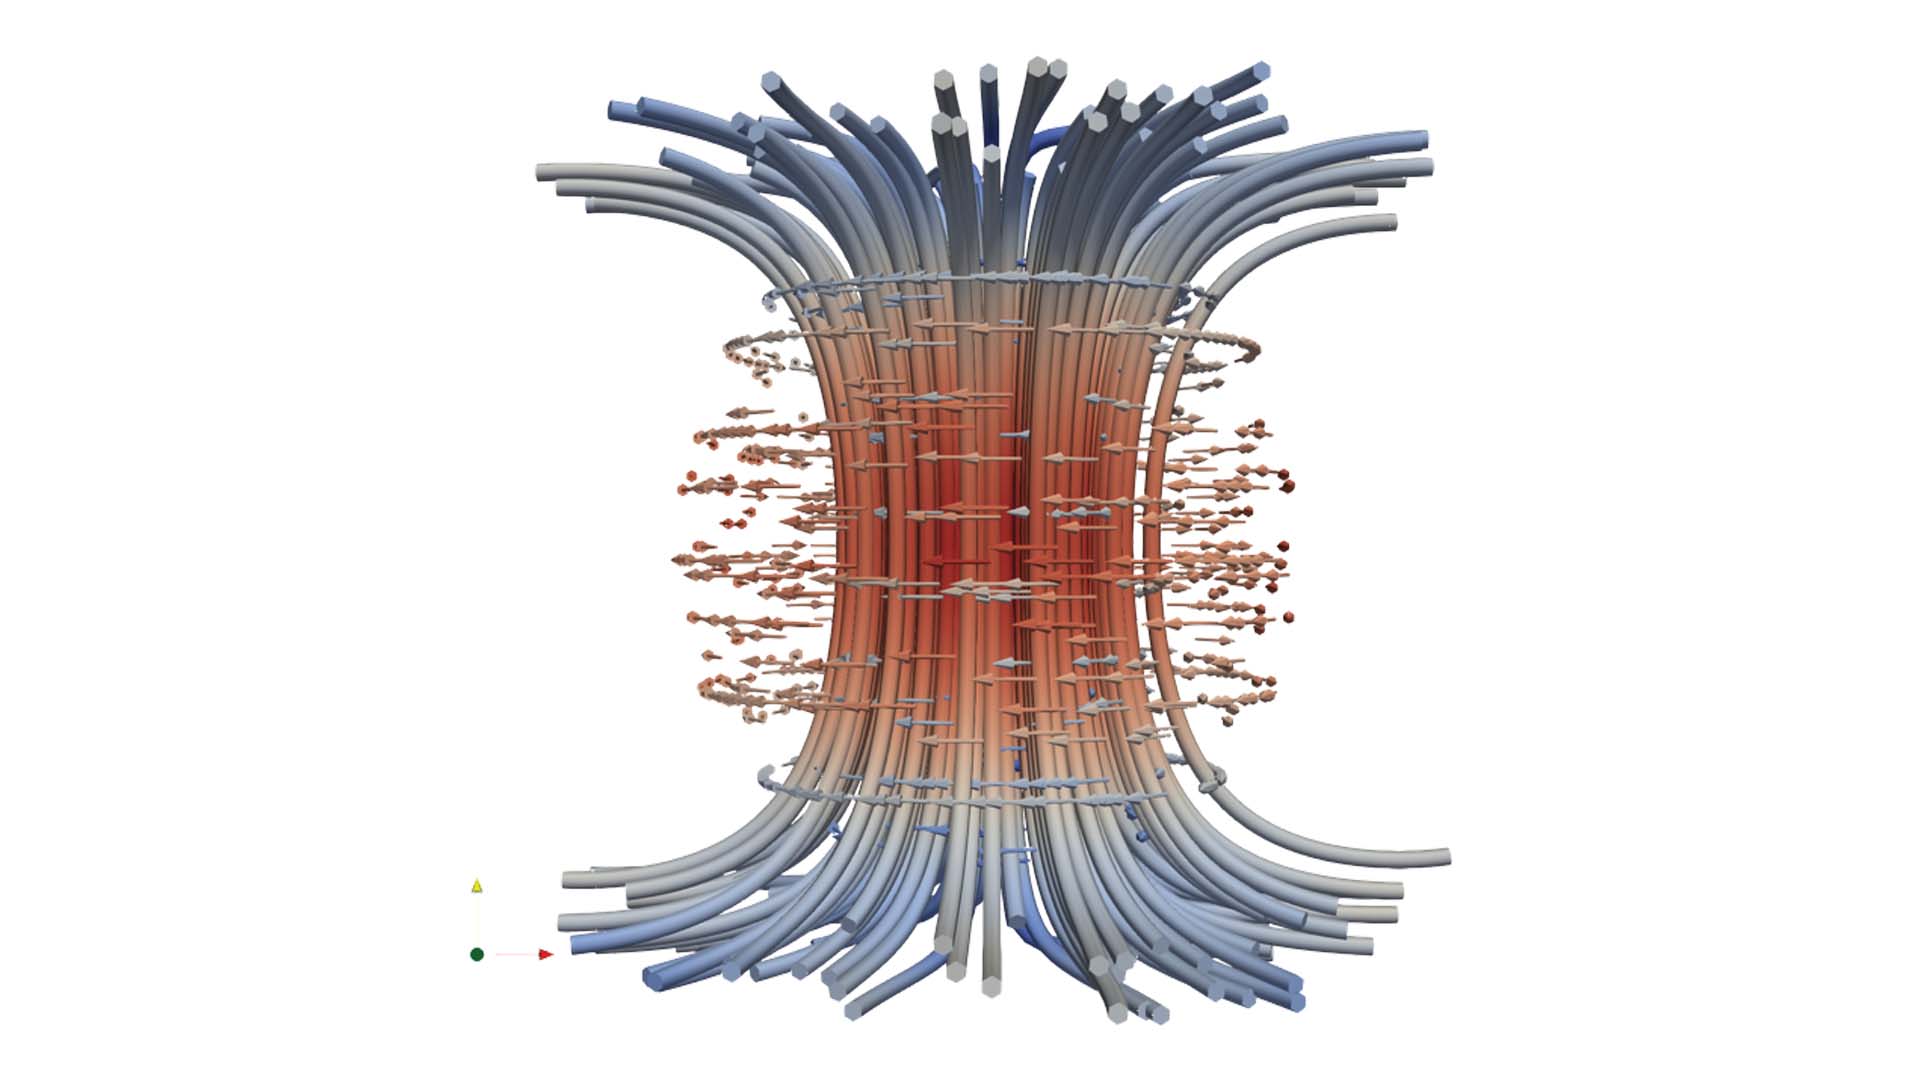 Computer simulations have accelerated physics understanding of fusion plasmas and provide opportunities for rapid fusion device design iteration.